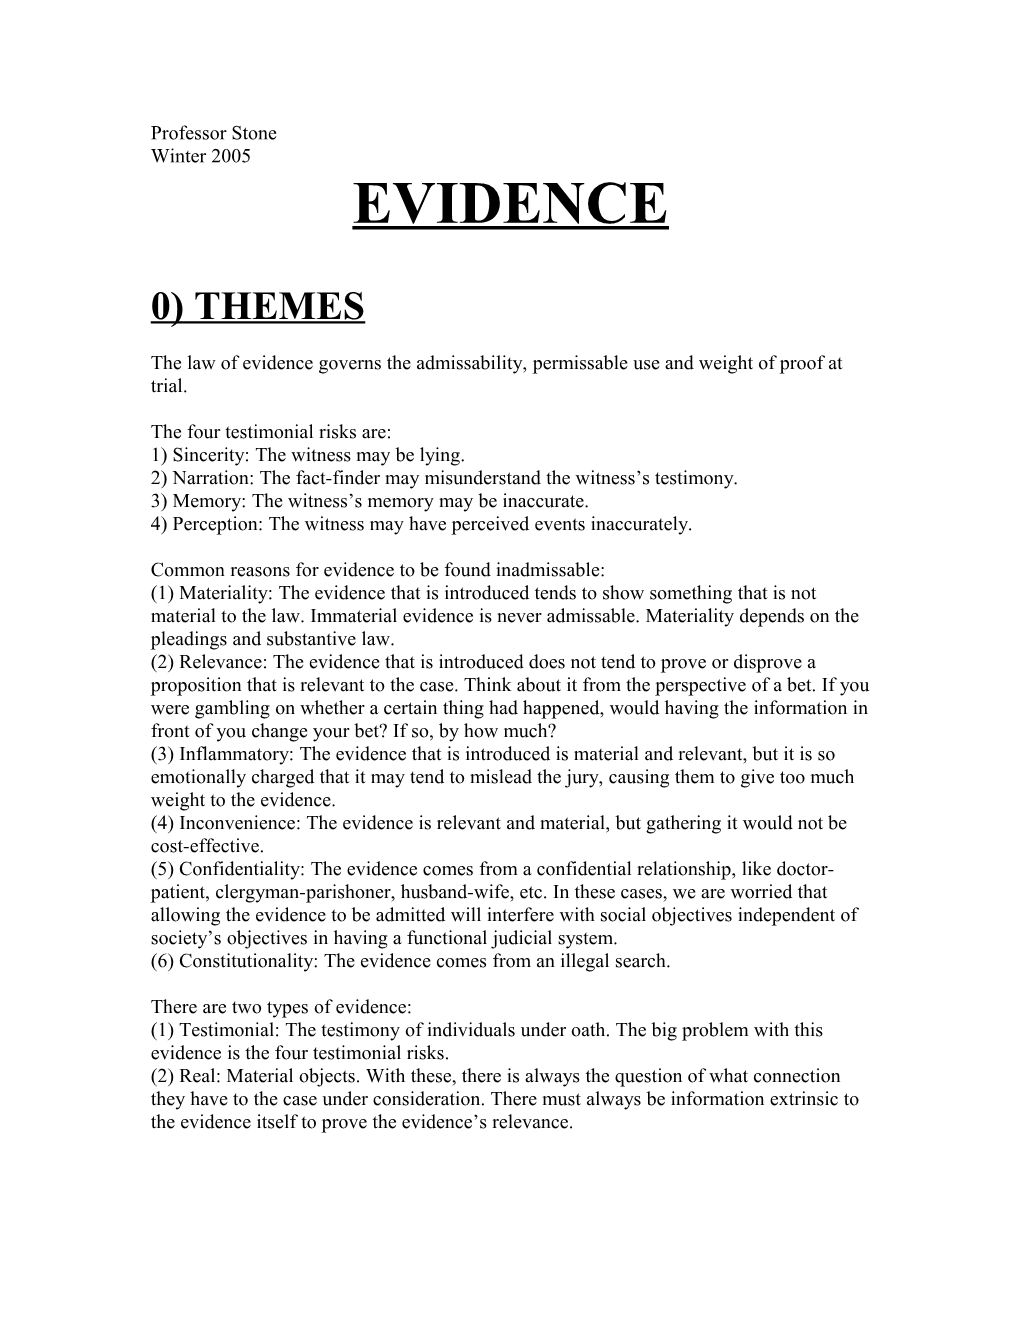 The Law of Evidence Governs the Admissability, Permissable Use and Weight of Proof at Trial